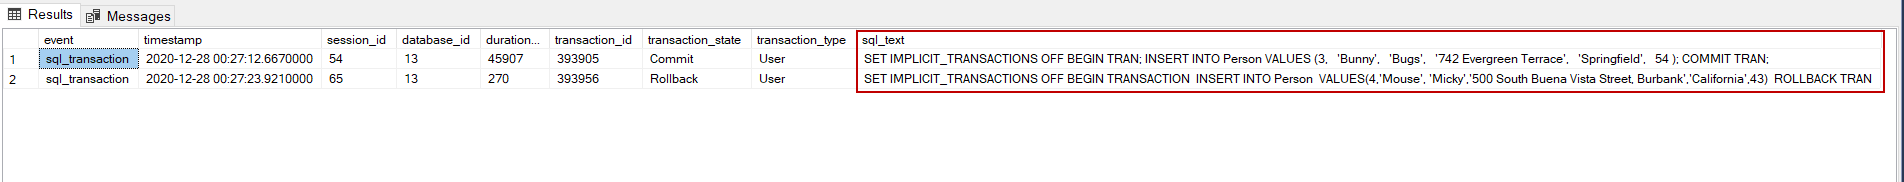 Monitoring transaction in SQL Server with extended events